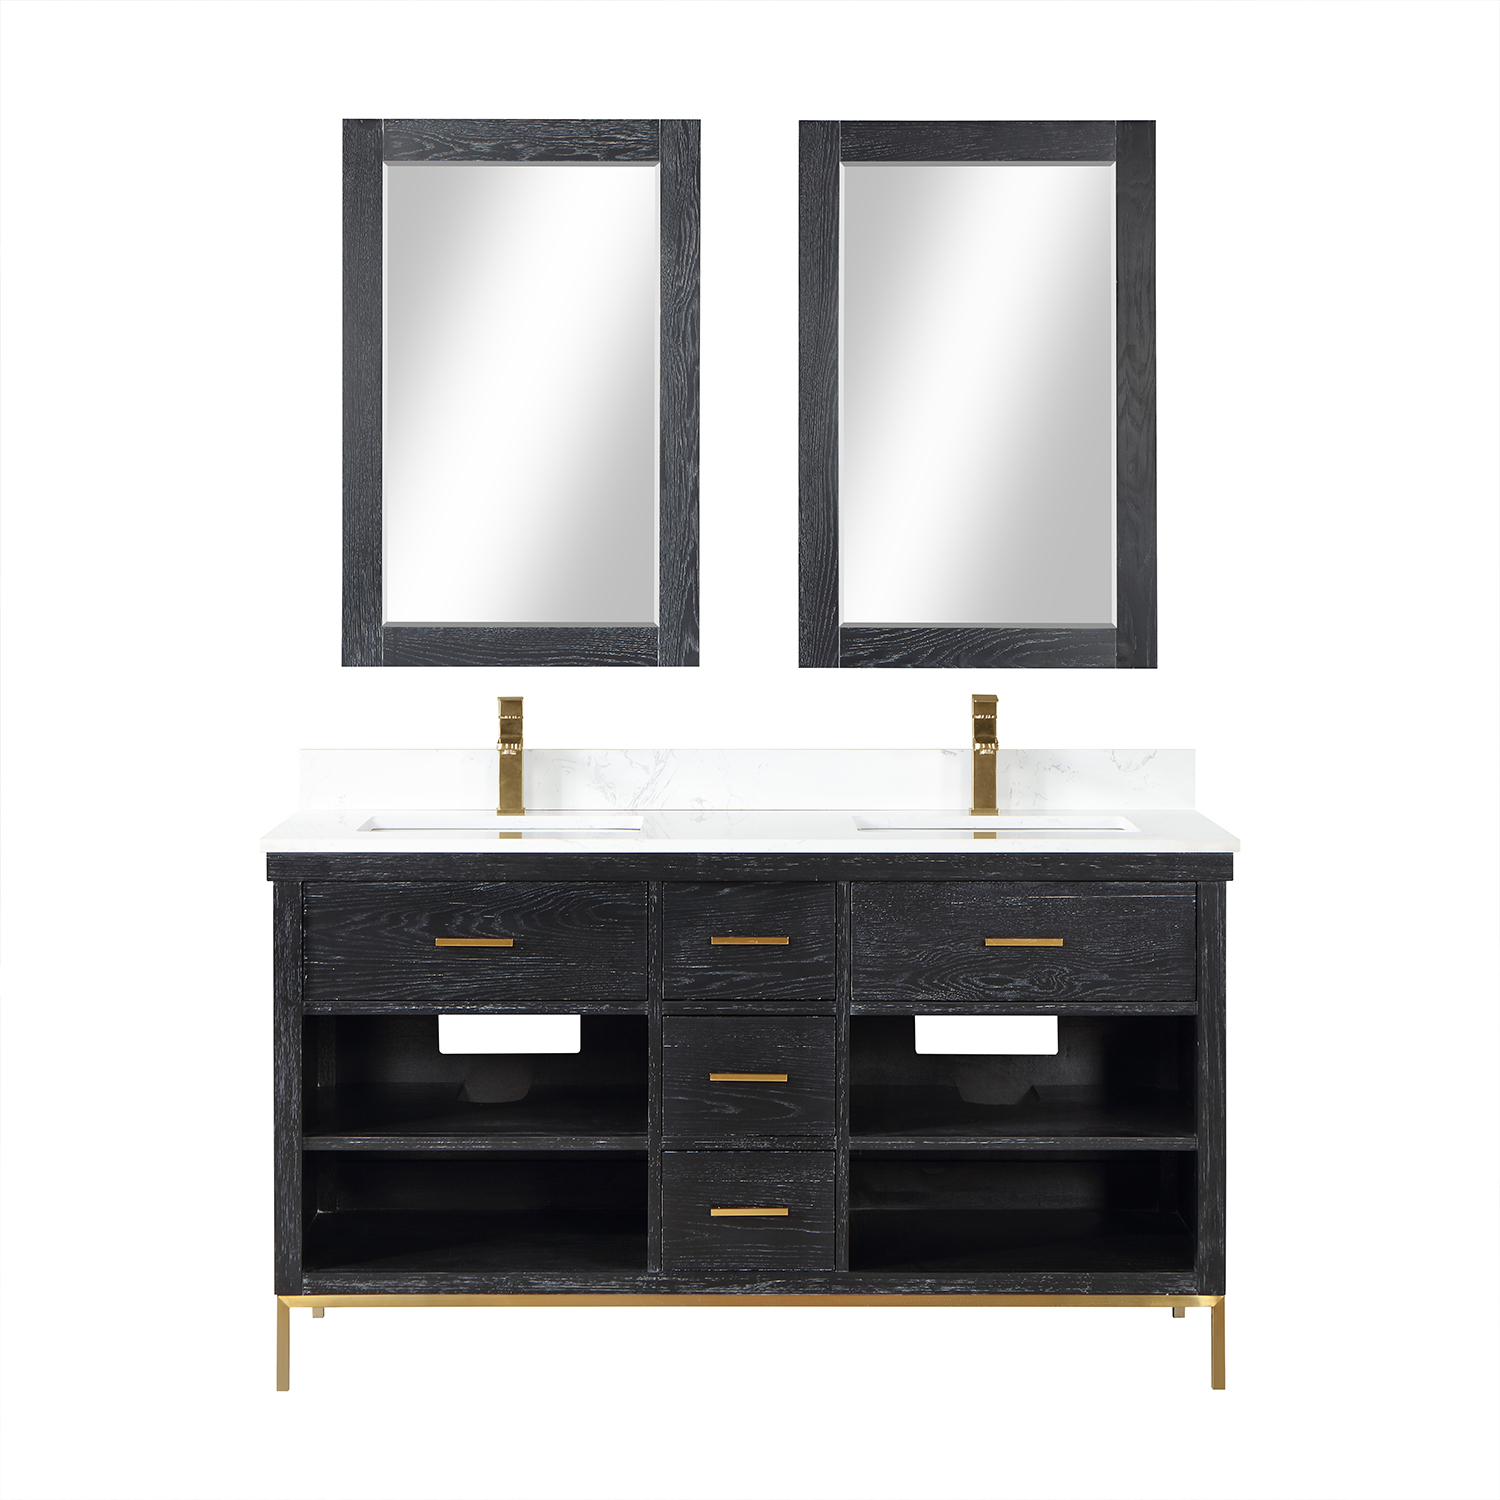 Issac Edwards Collection 60" Double Bathroom Vanity Set in Black Oak with Carrara White Composite Stone Countertop without Mirror